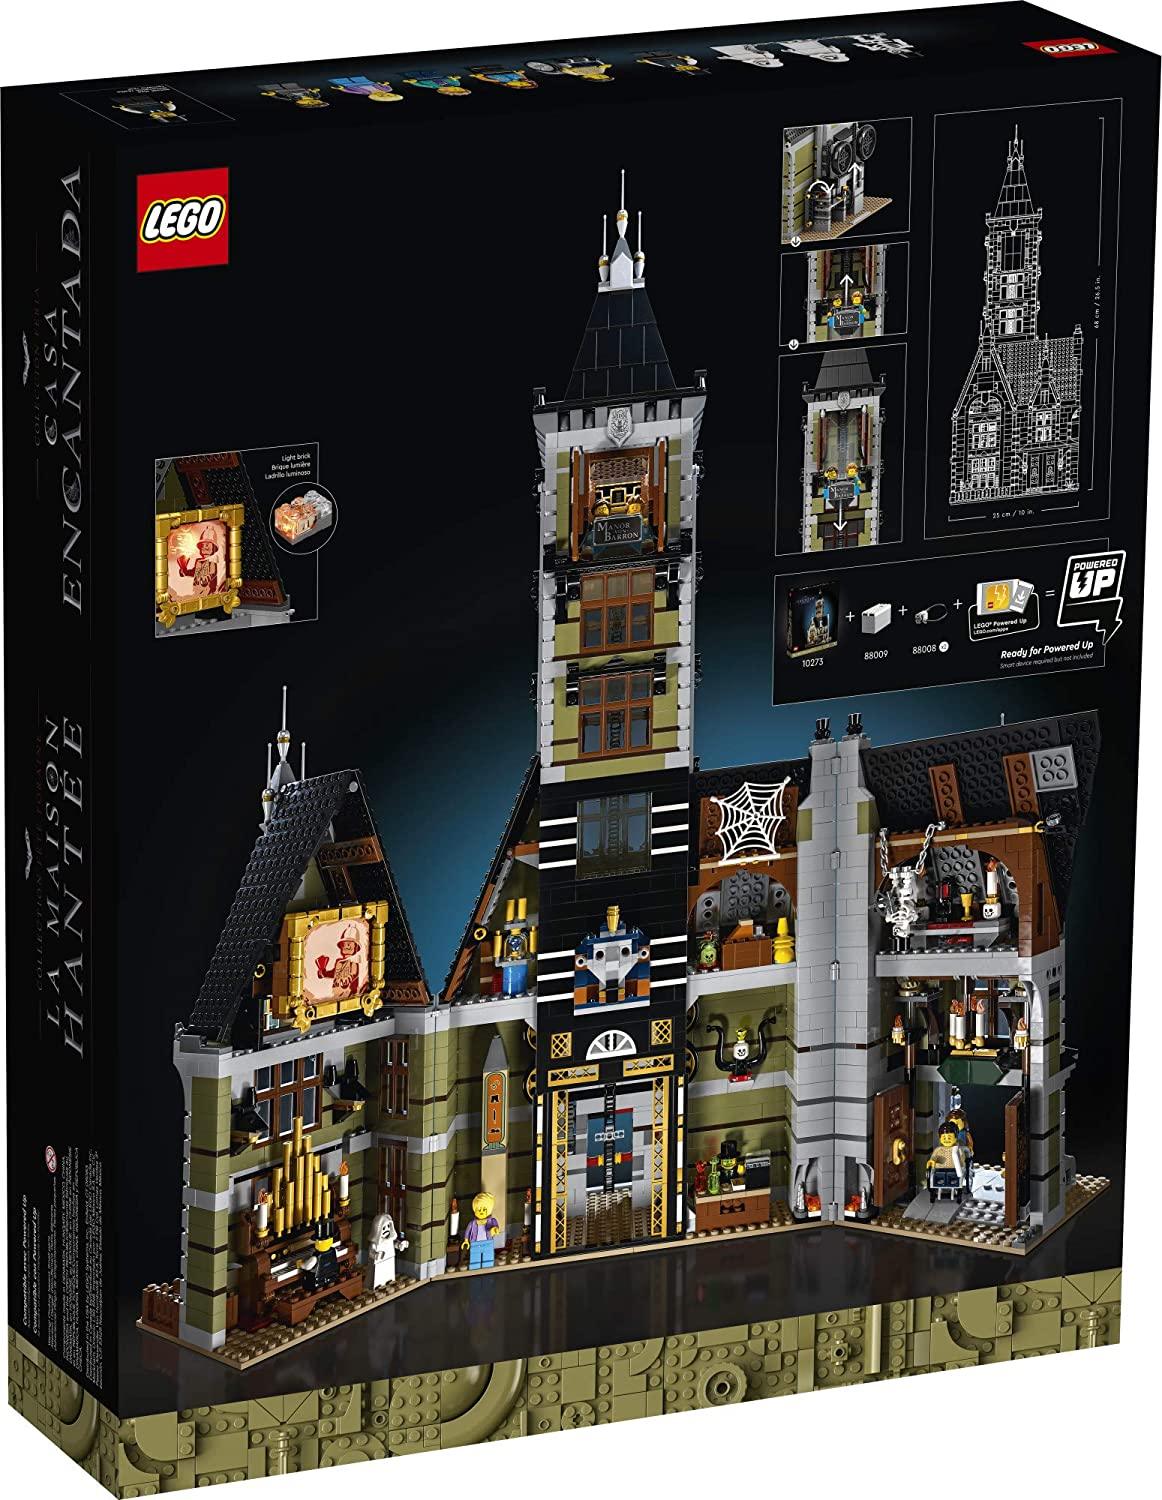 LEGO Haunted House A Creative DIY Project Model Haunted House for Adults - FunCorp India